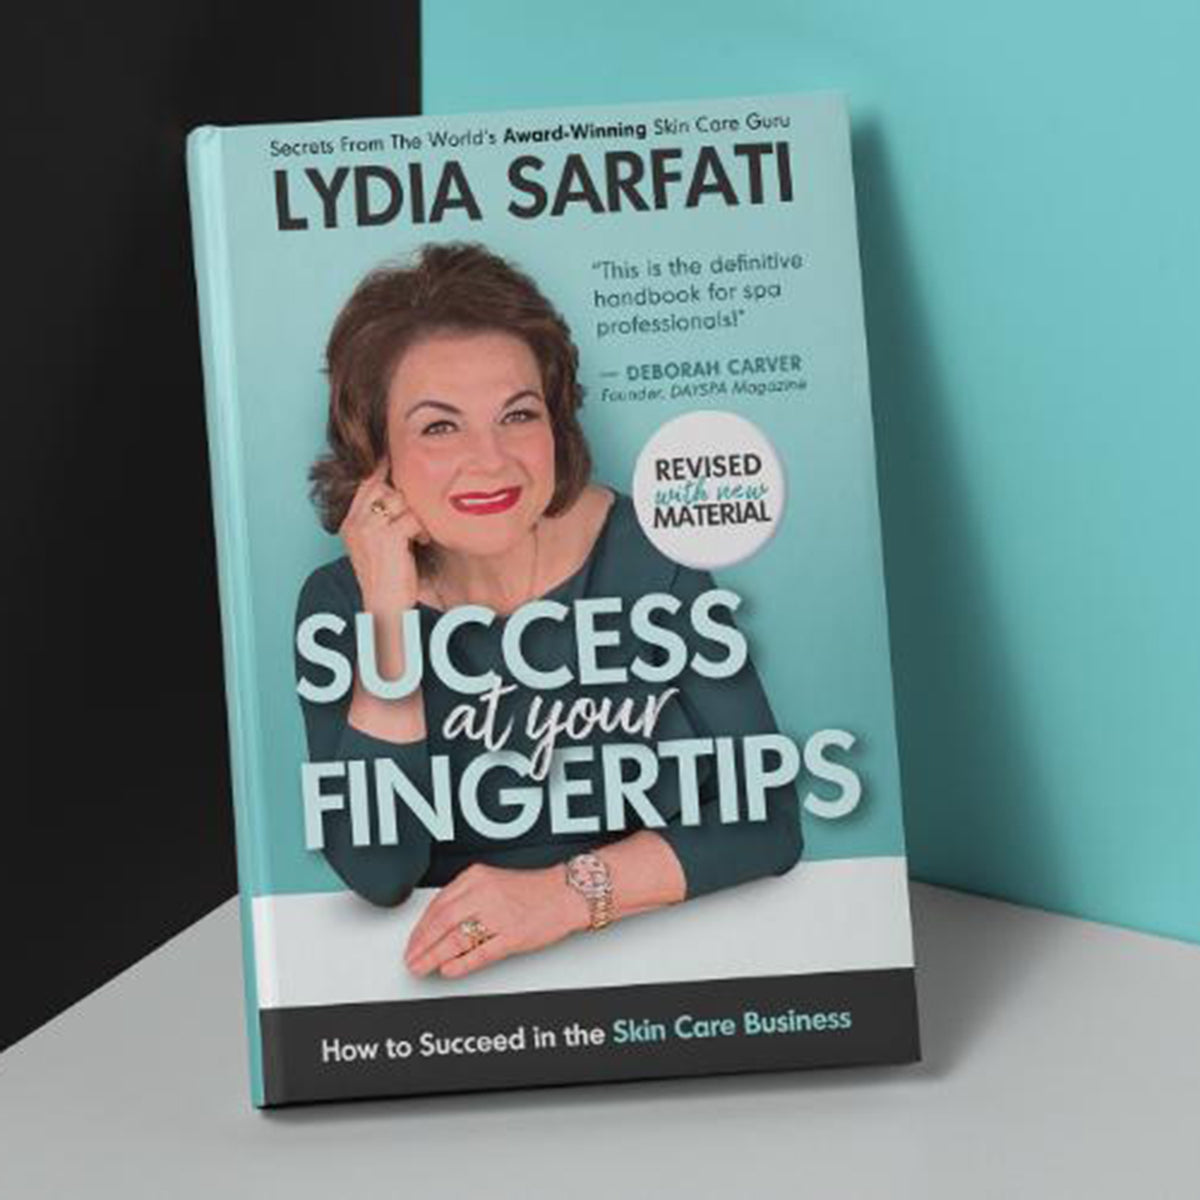 Success at Your Fingertips: How to Succeed in the Skin Care Business book leanding in corner of room